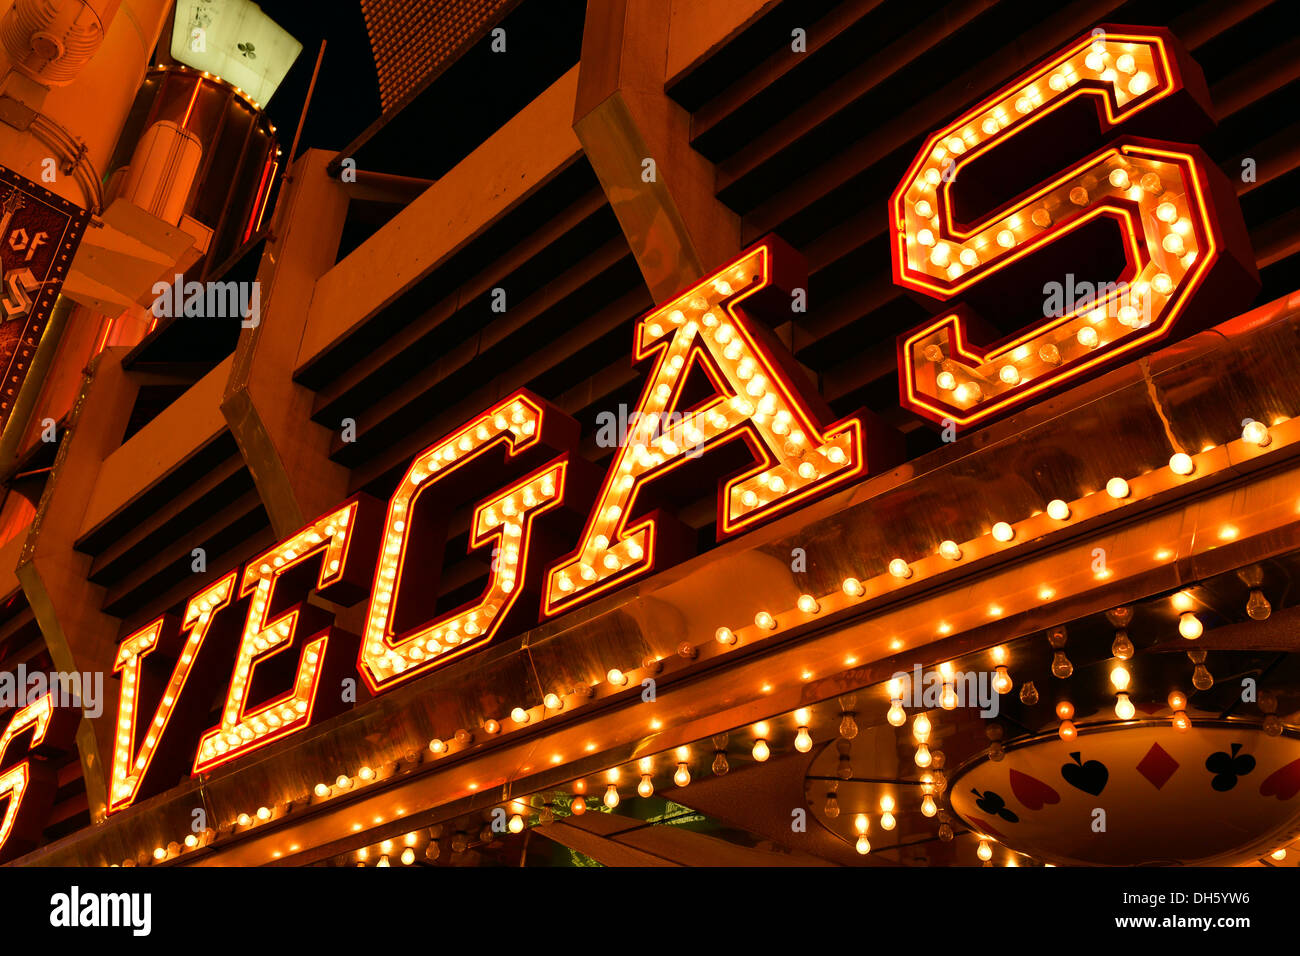 Lettering of the Vegas Club Casino Hotel, Fremont Street Experience in old Las Vegas, Downtown Las Vegas, Nevada Stock Photo